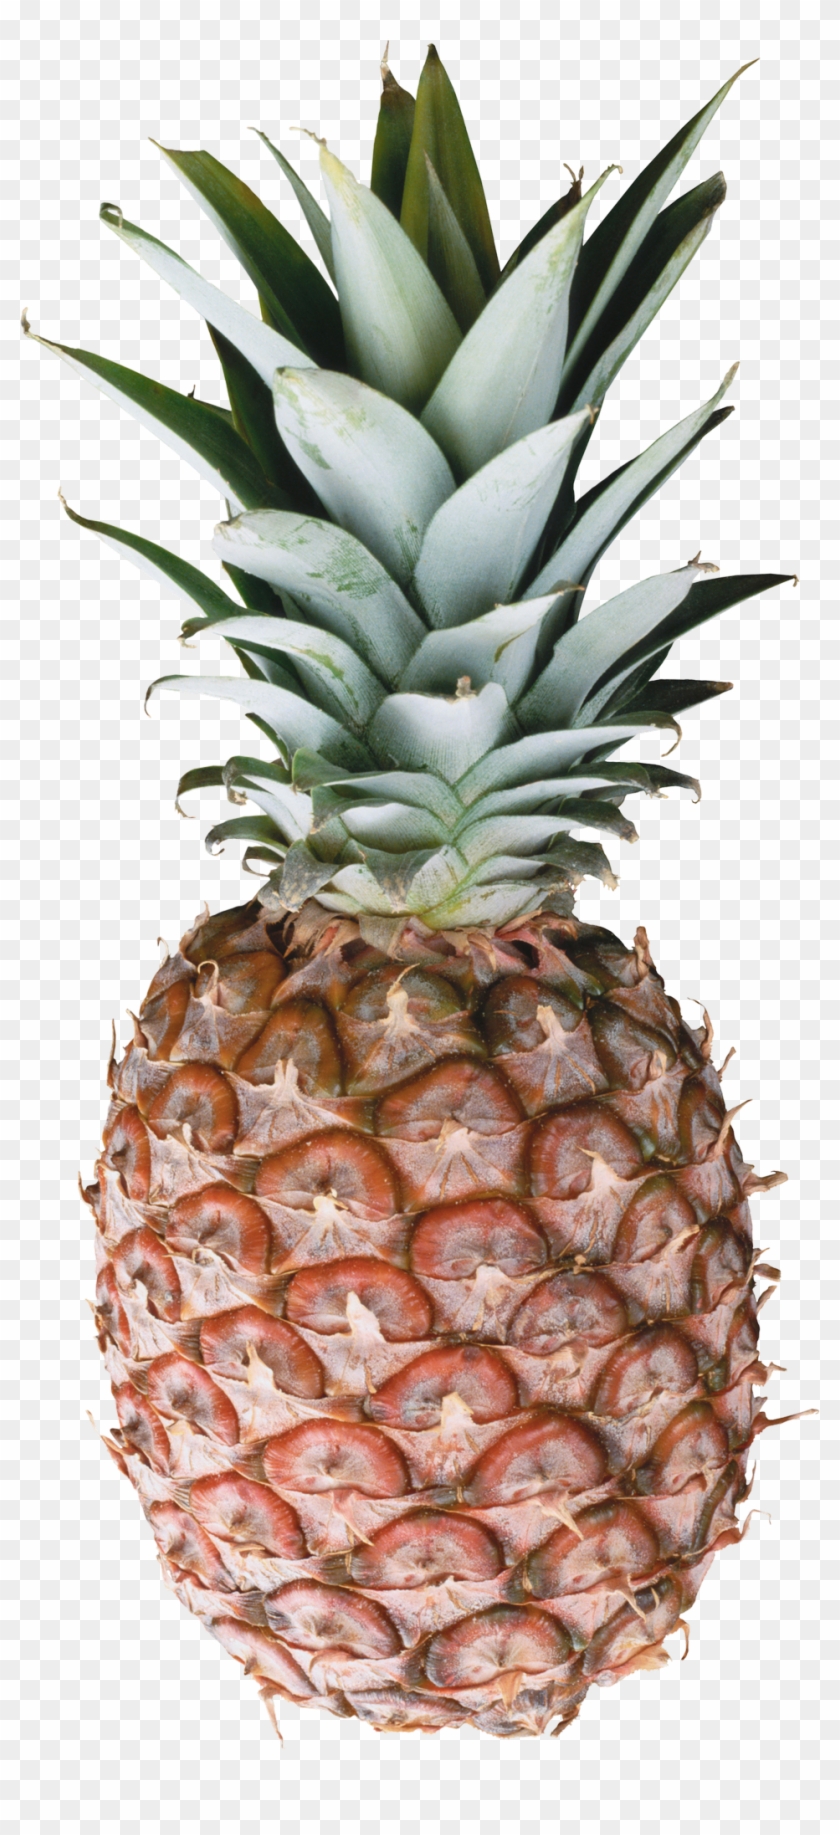 Pineapple - Pineapple And Marble Clipart